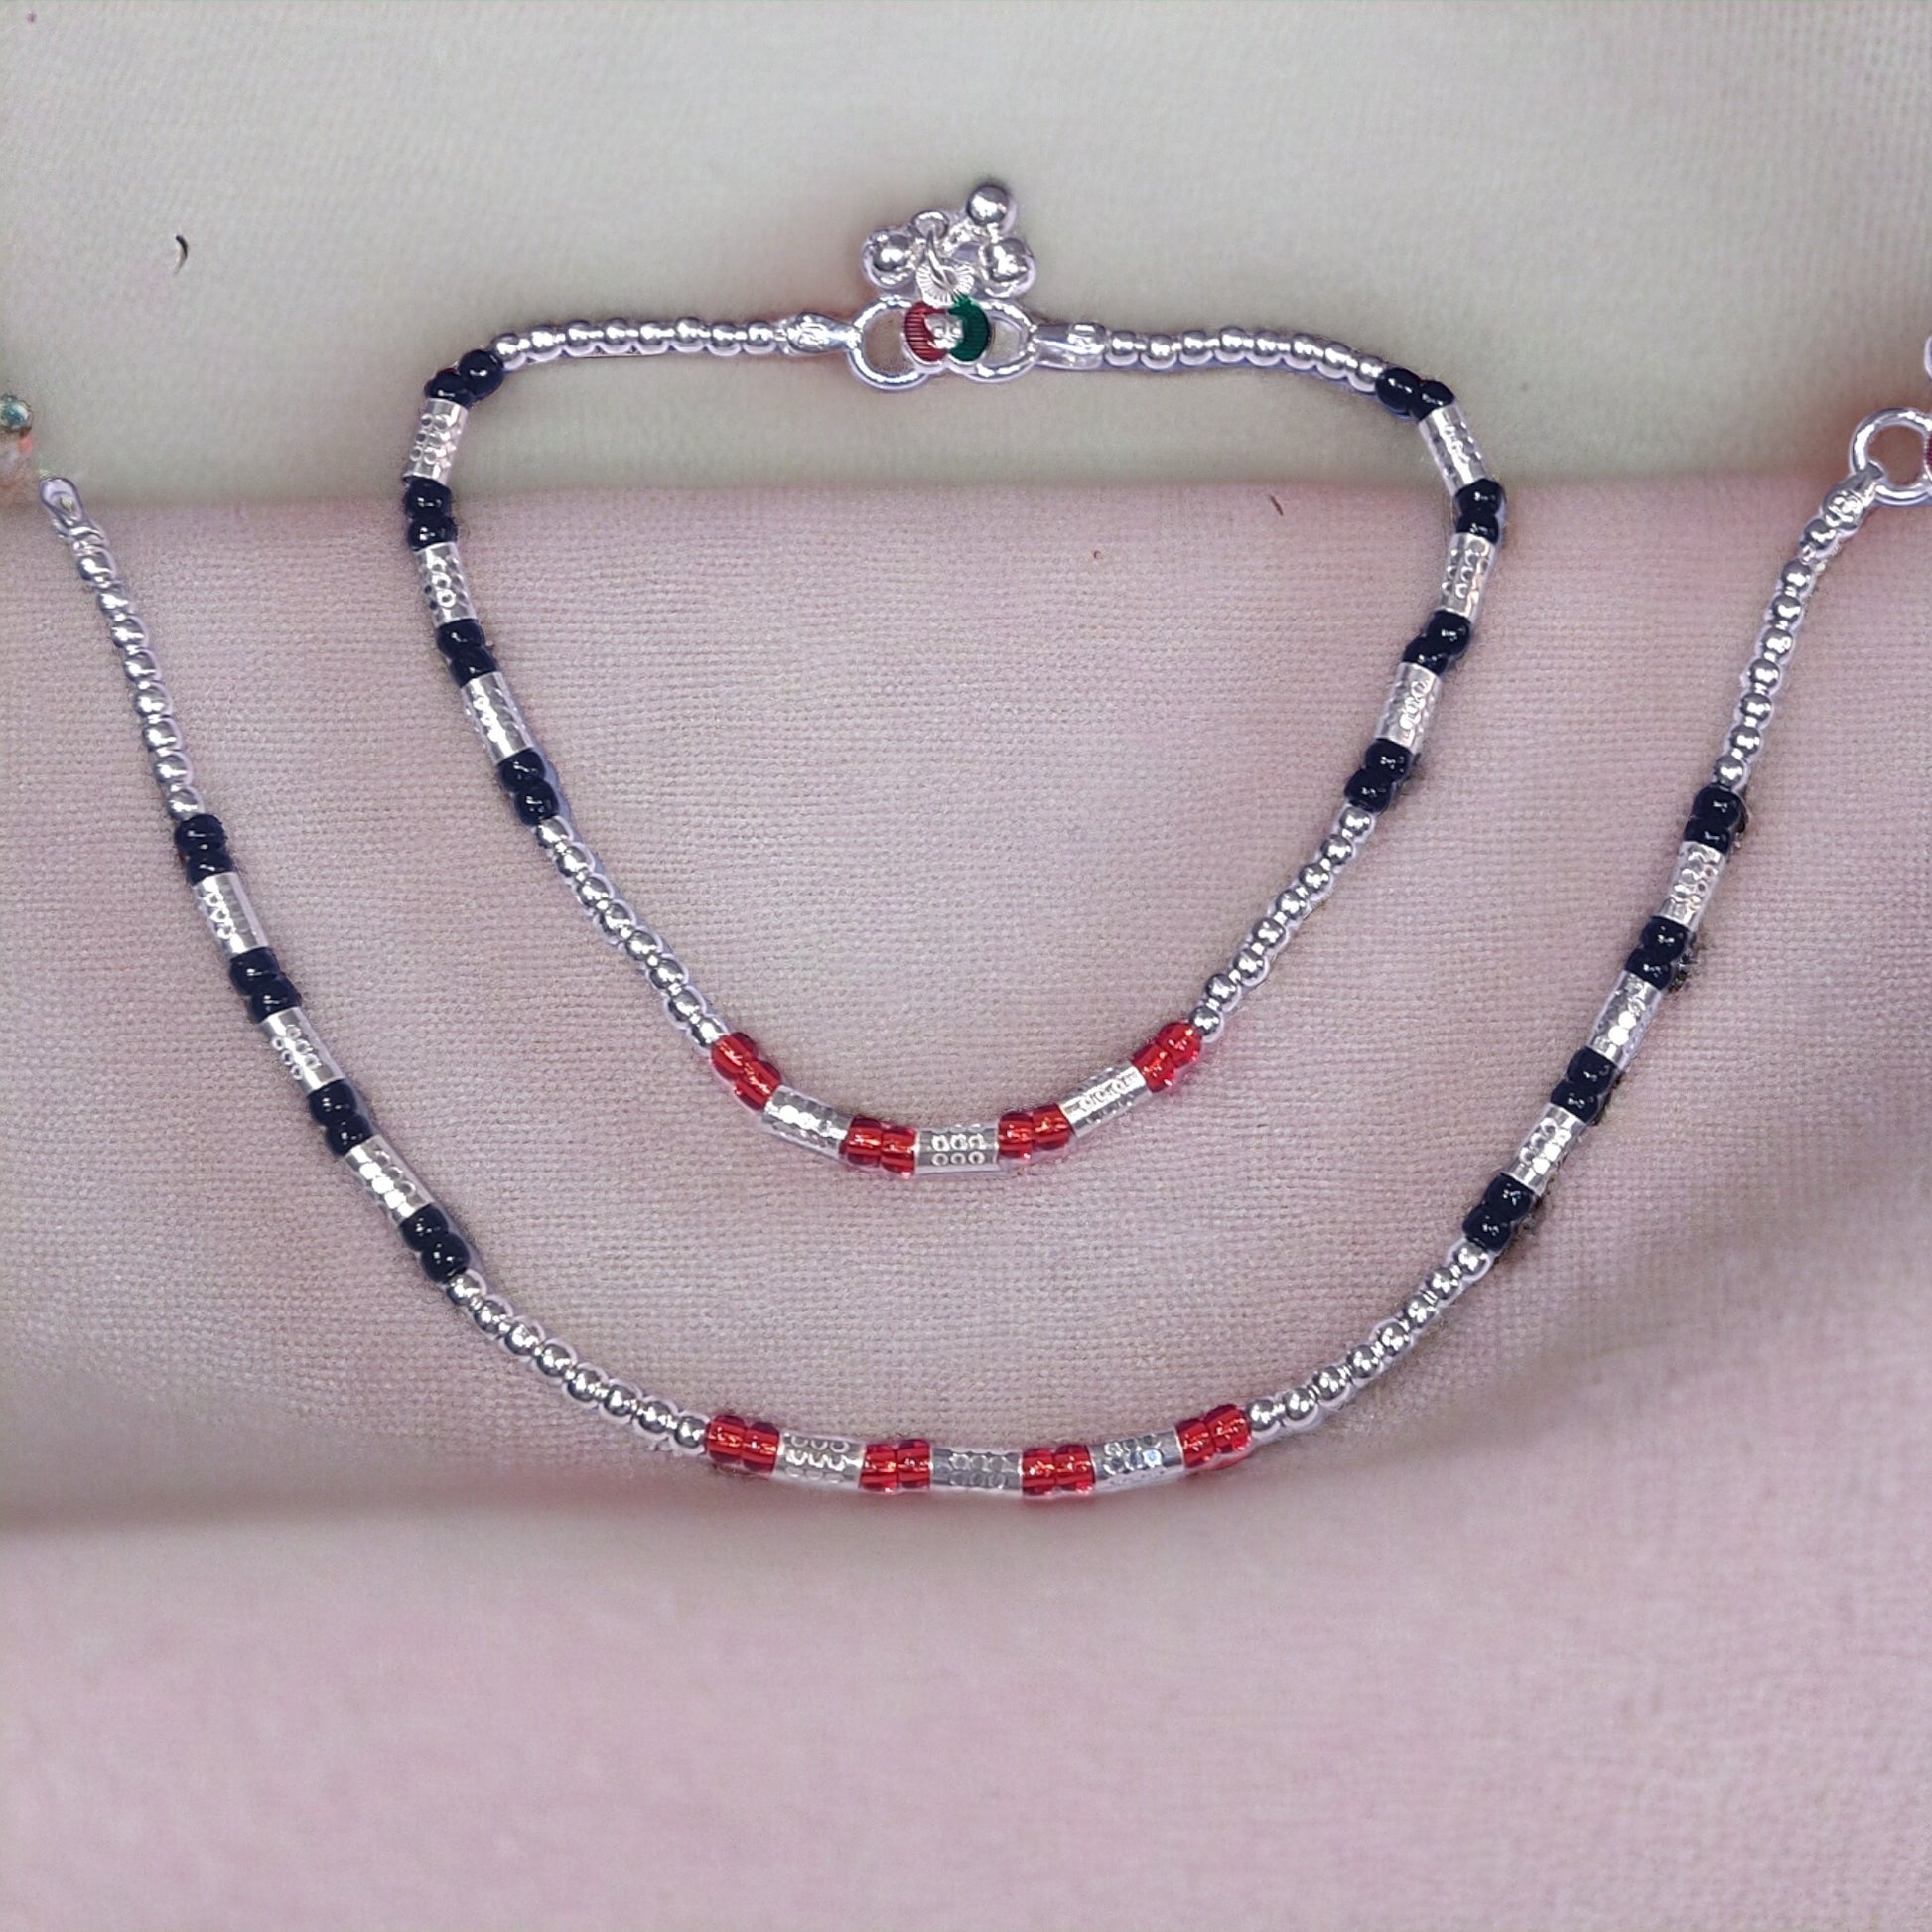 Silver payal with black and red beads